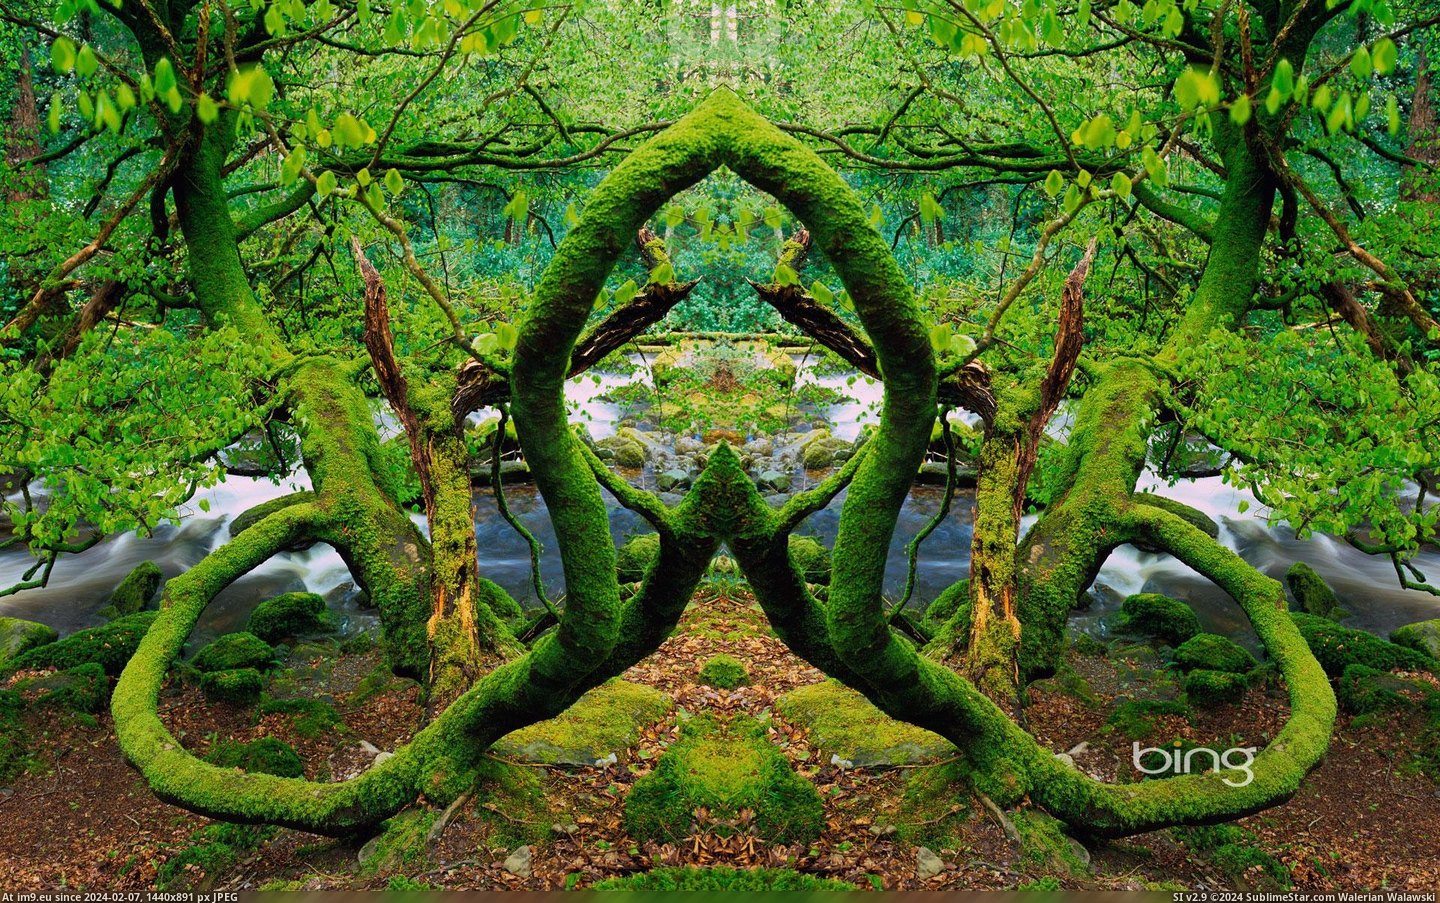 Mirror-image photo of the moss-covered trees in Killarney National Park, Ireland (Alamy) 2013-03-17 (in Best photos of March 2013)